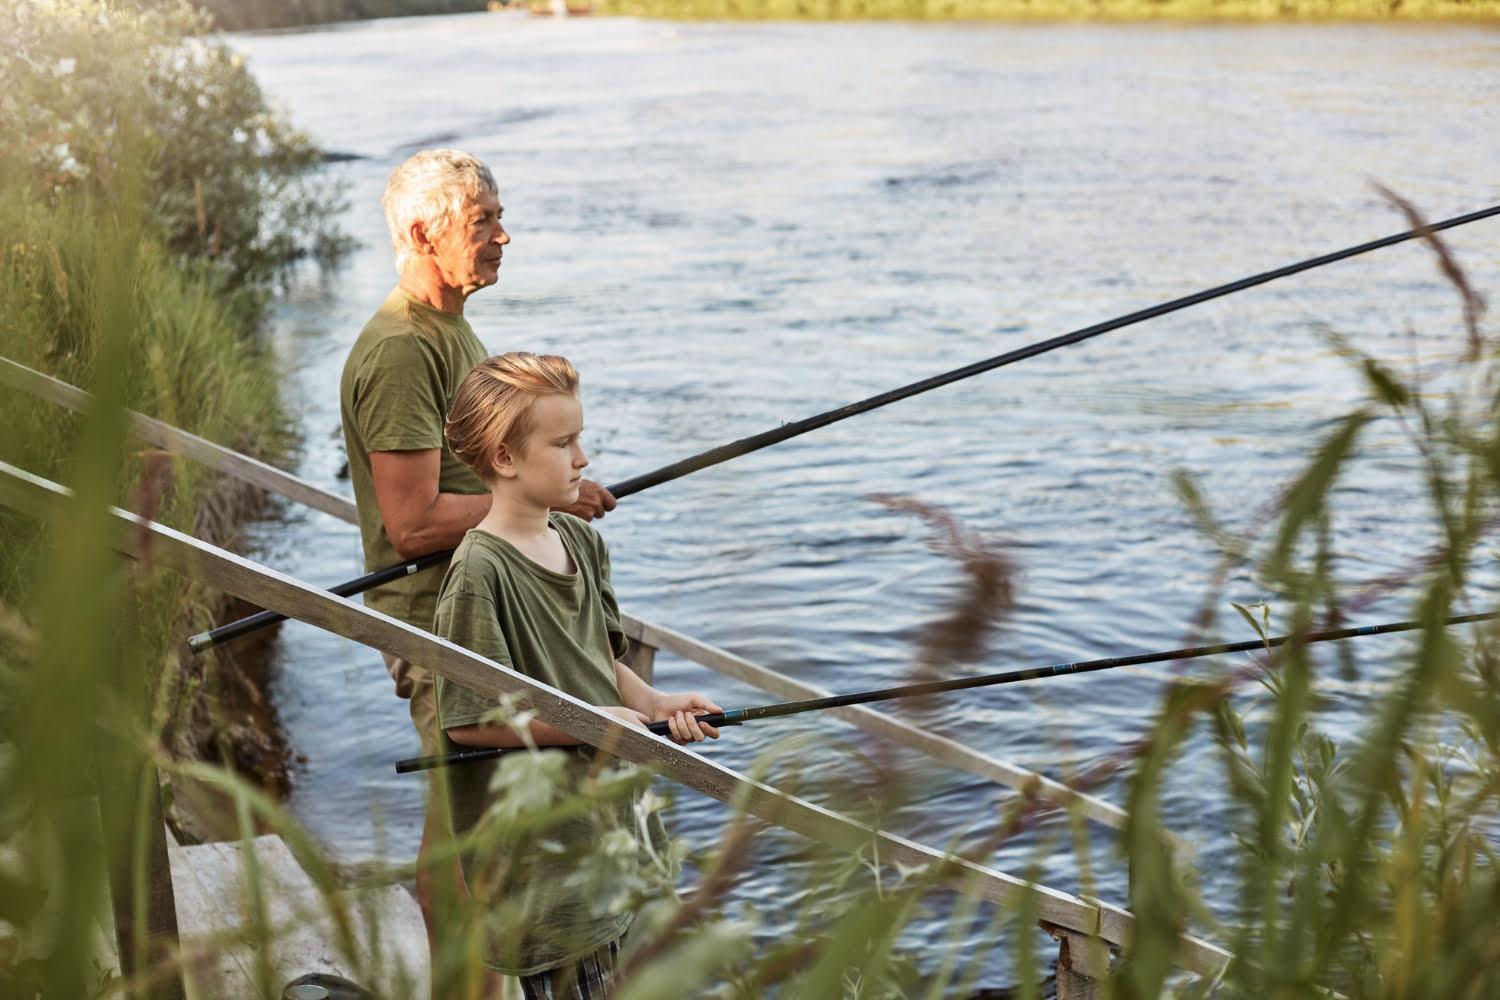 european grey haired mature father with son outdoors fishing by lake river standing near water with fishing rods hands dress casually enjoying hobby nature